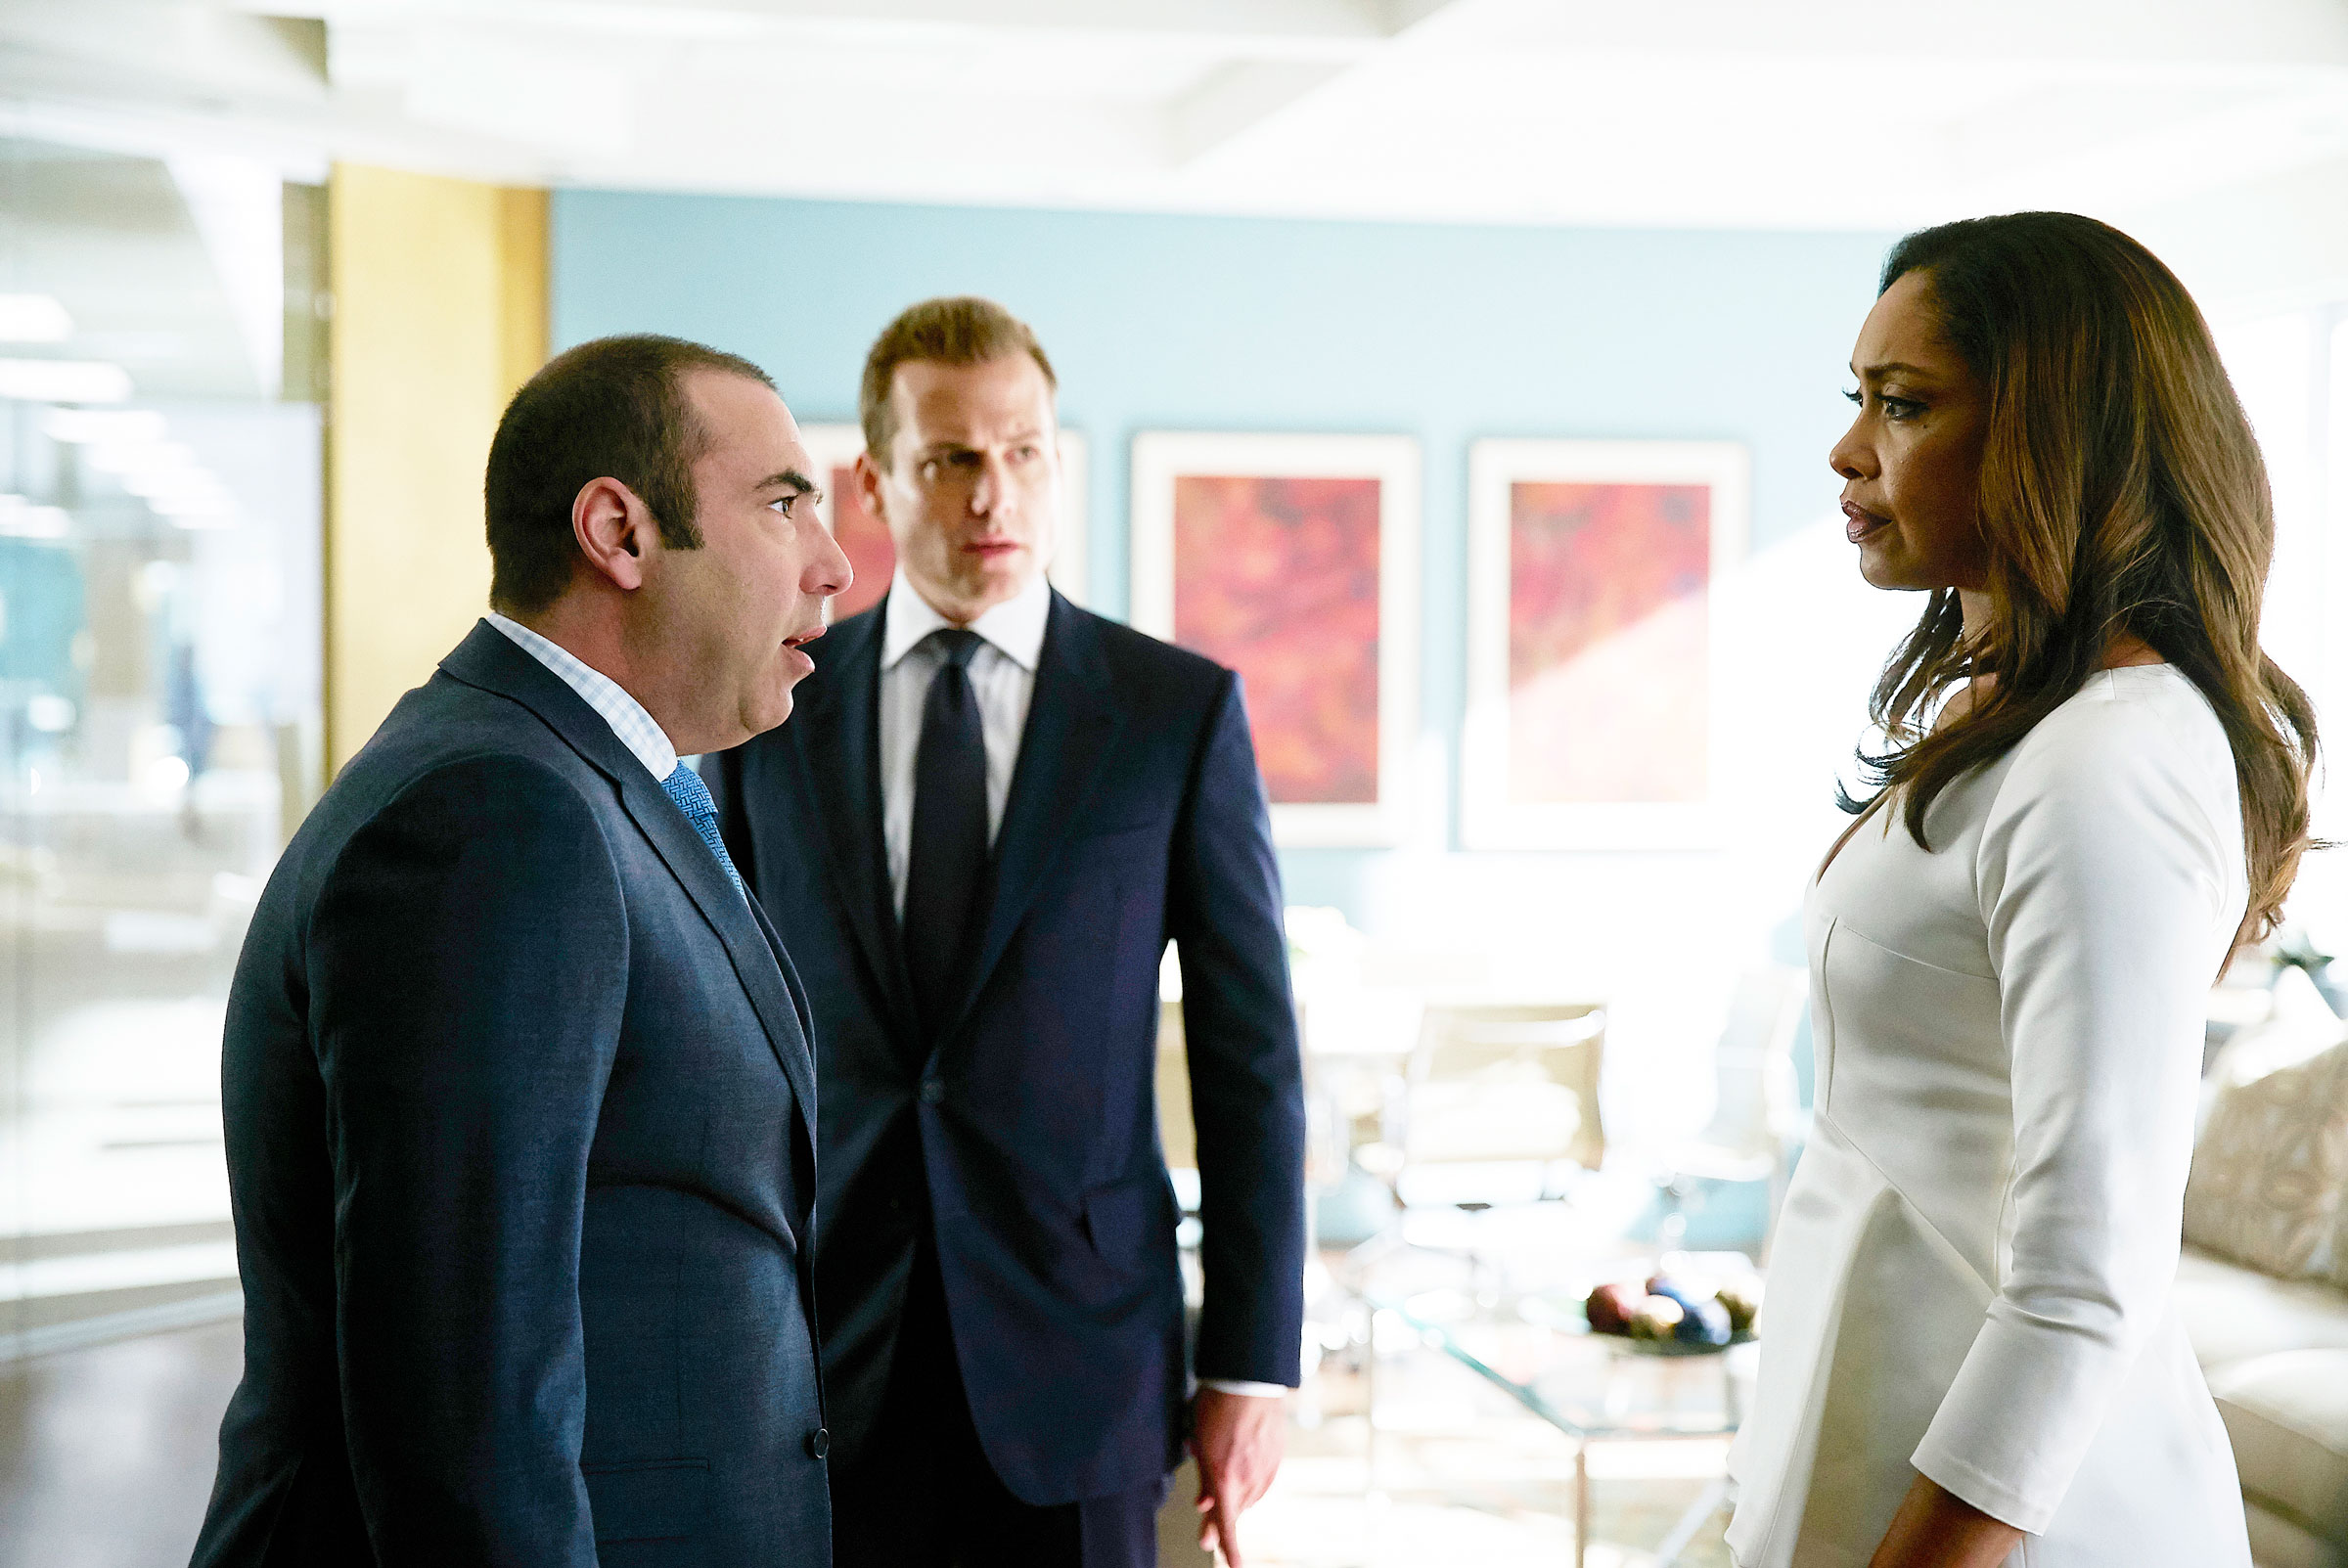 still from season 5 of Suits showing Rick Hoffman as Louis Litt, Gabriel Macht as Harvey Specter, and Gina Torres as Jessica Pearson